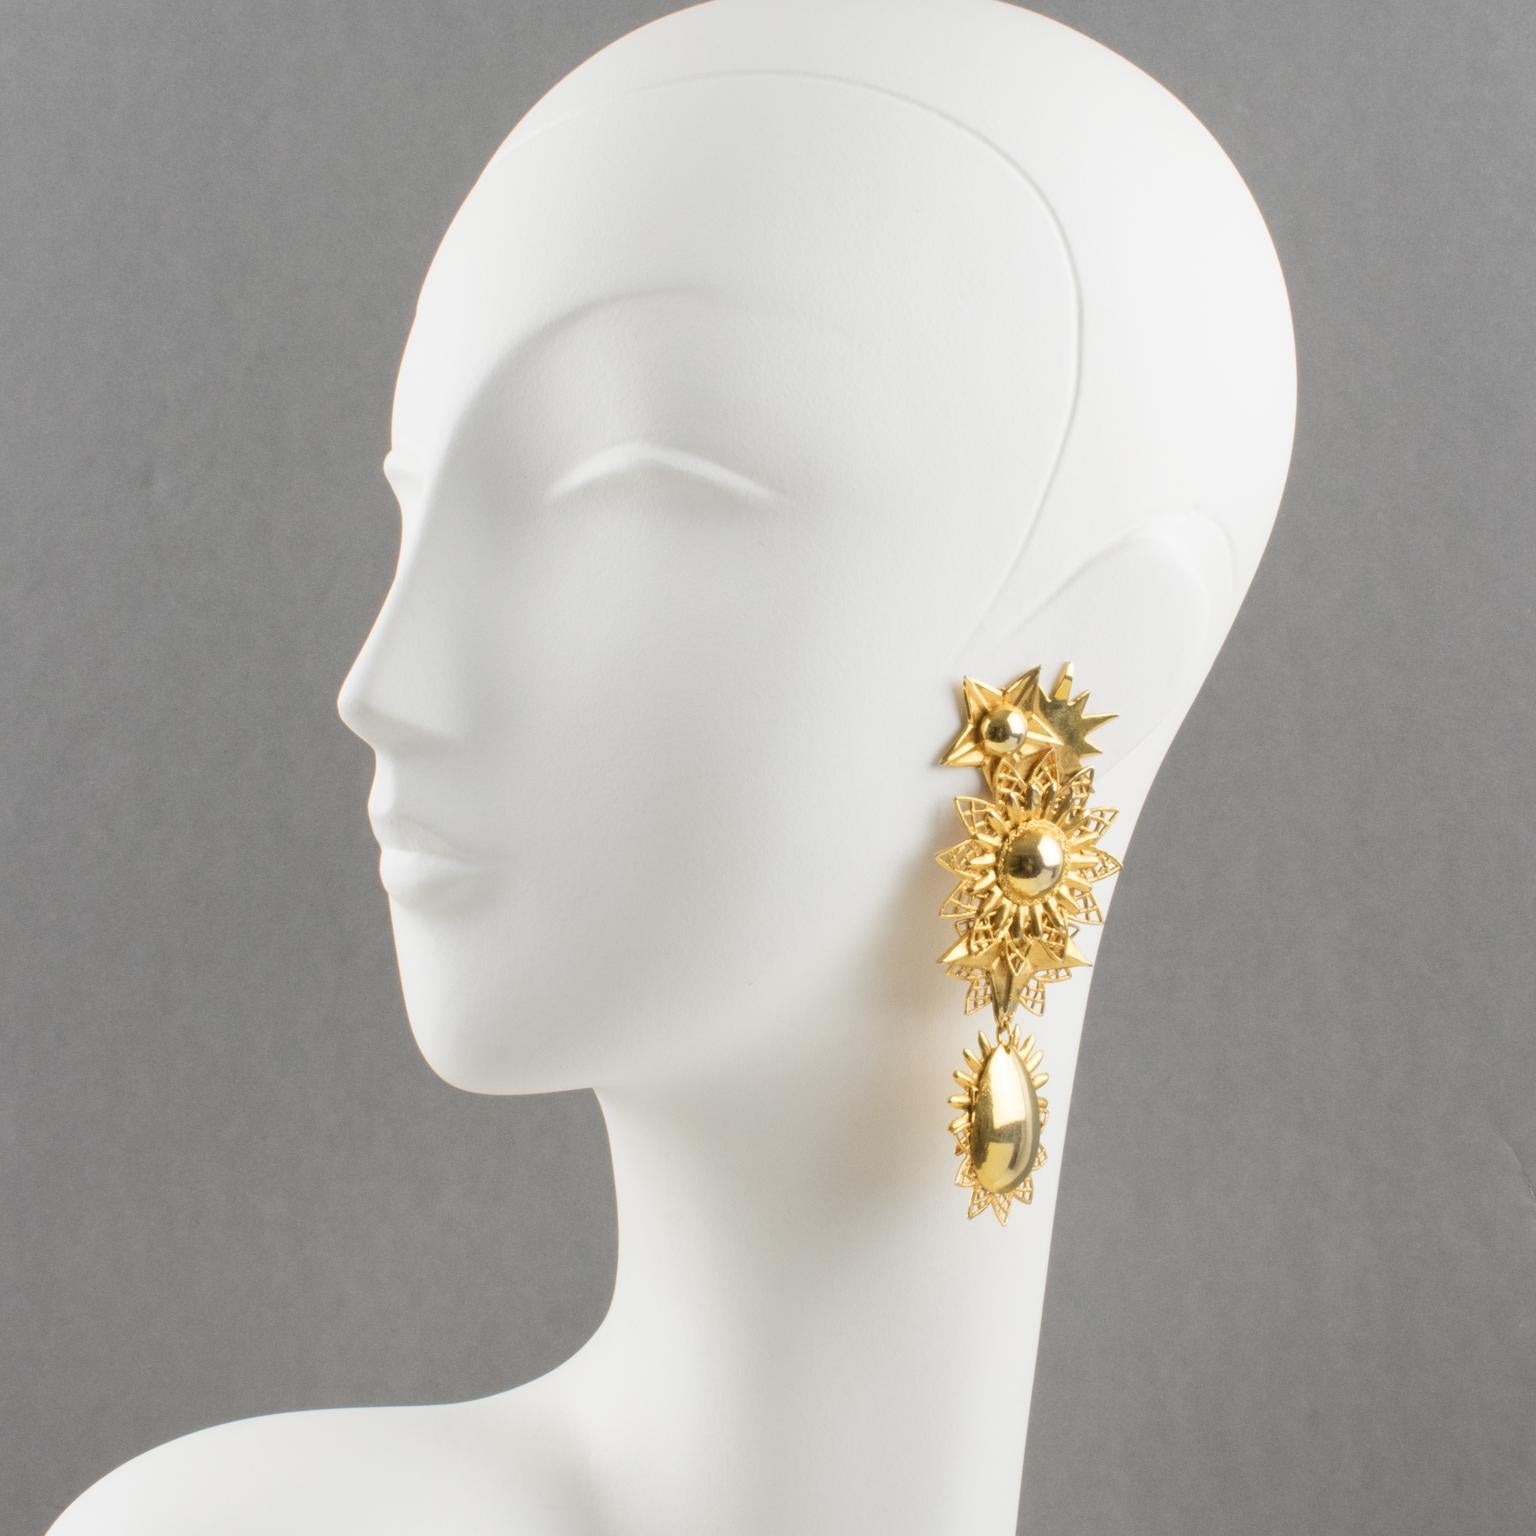 Charming Zoe Coste gilt metal dangling clip-on earrings. Features stars and suns carved design with gilt metal all textured and ornate. Unusual design from that famous French designer, creator of the Reminiscence brand. Marked underside 